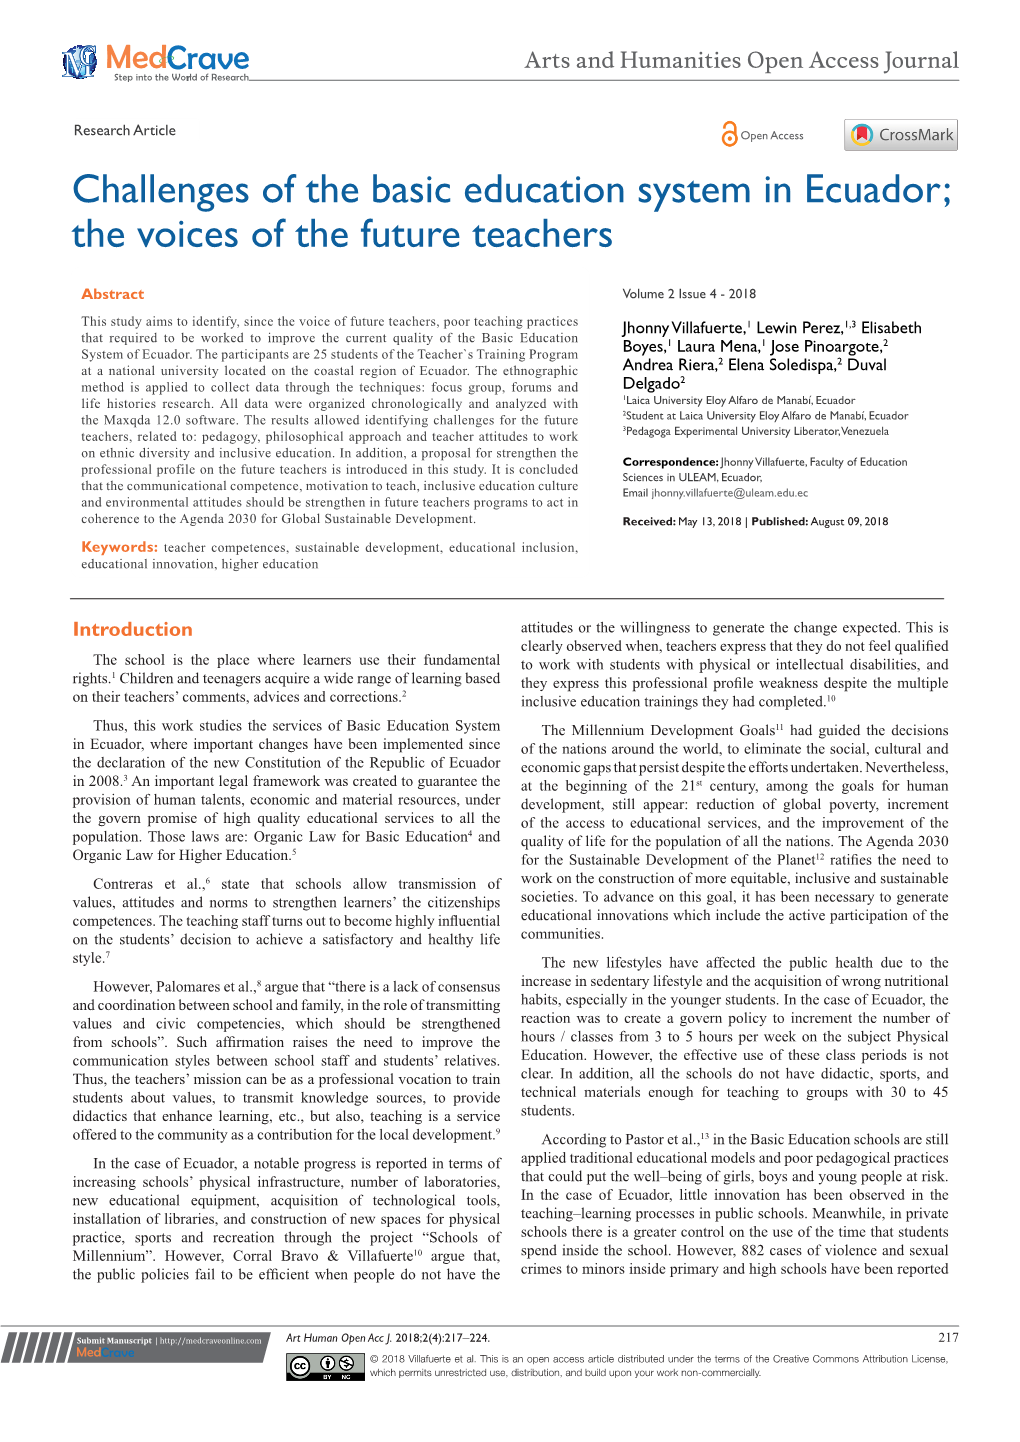 Challenges of the Basic Education System in Ecuador; the Voices of the Future Teachers